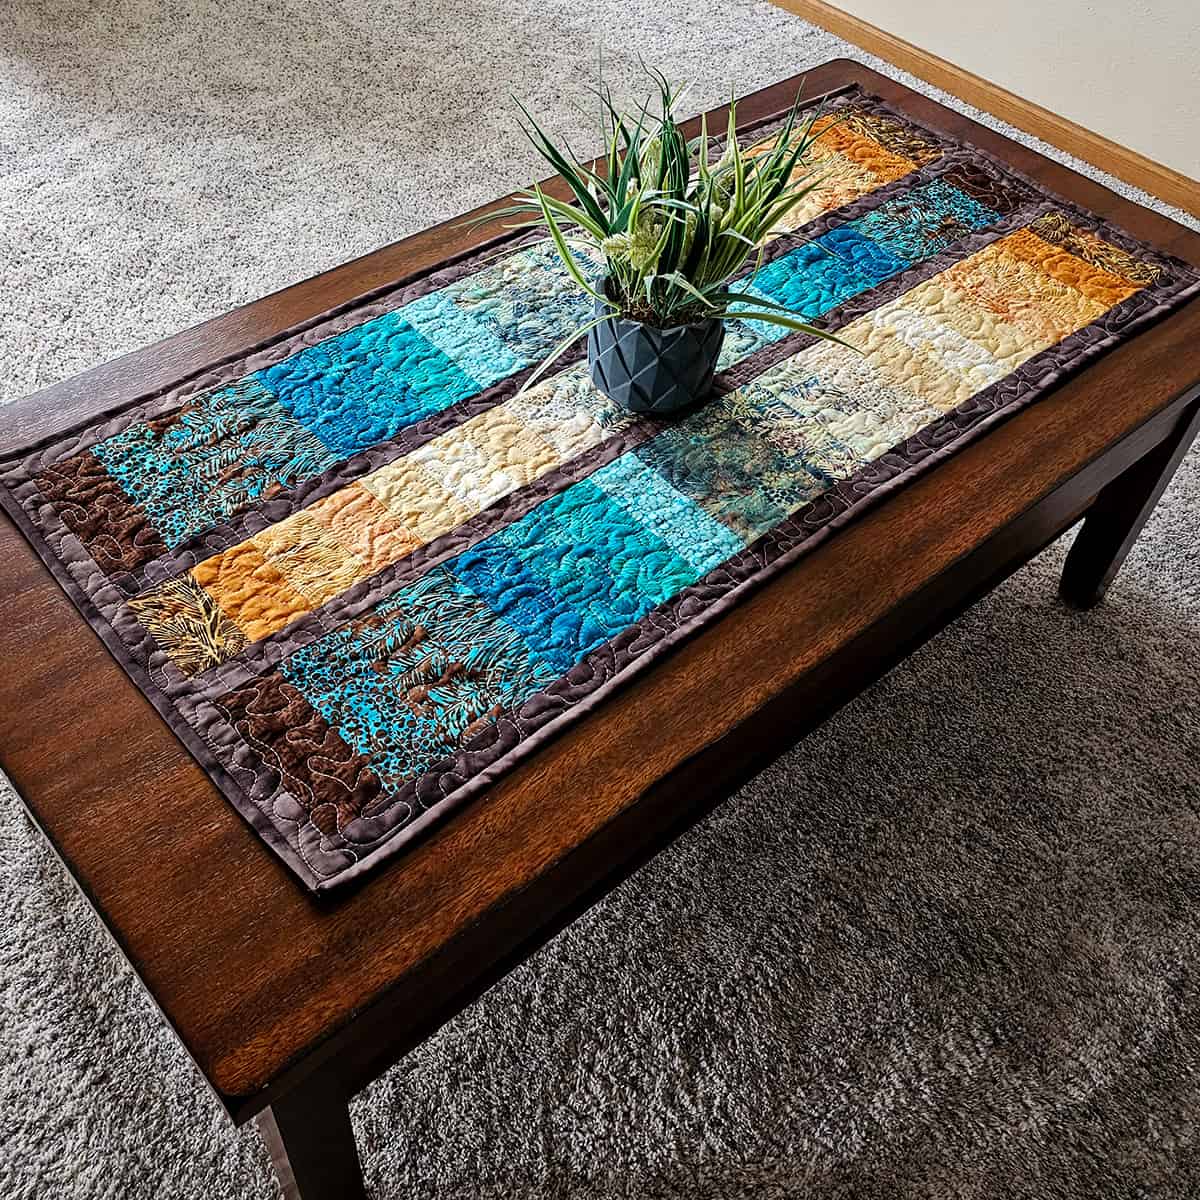 Oasis table runner in living room on coffee table